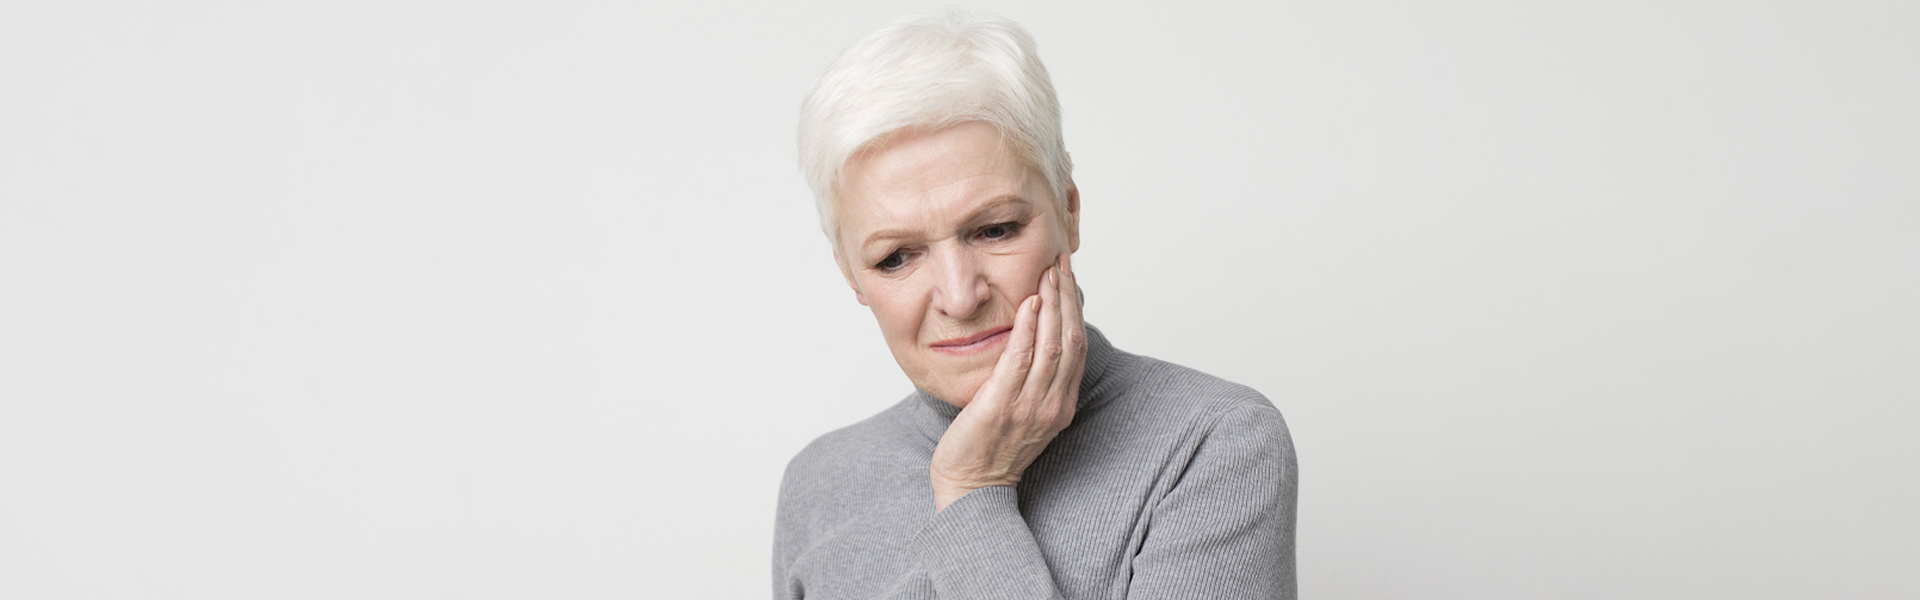 Understanding TMJ Disorders and Treatment Options Available